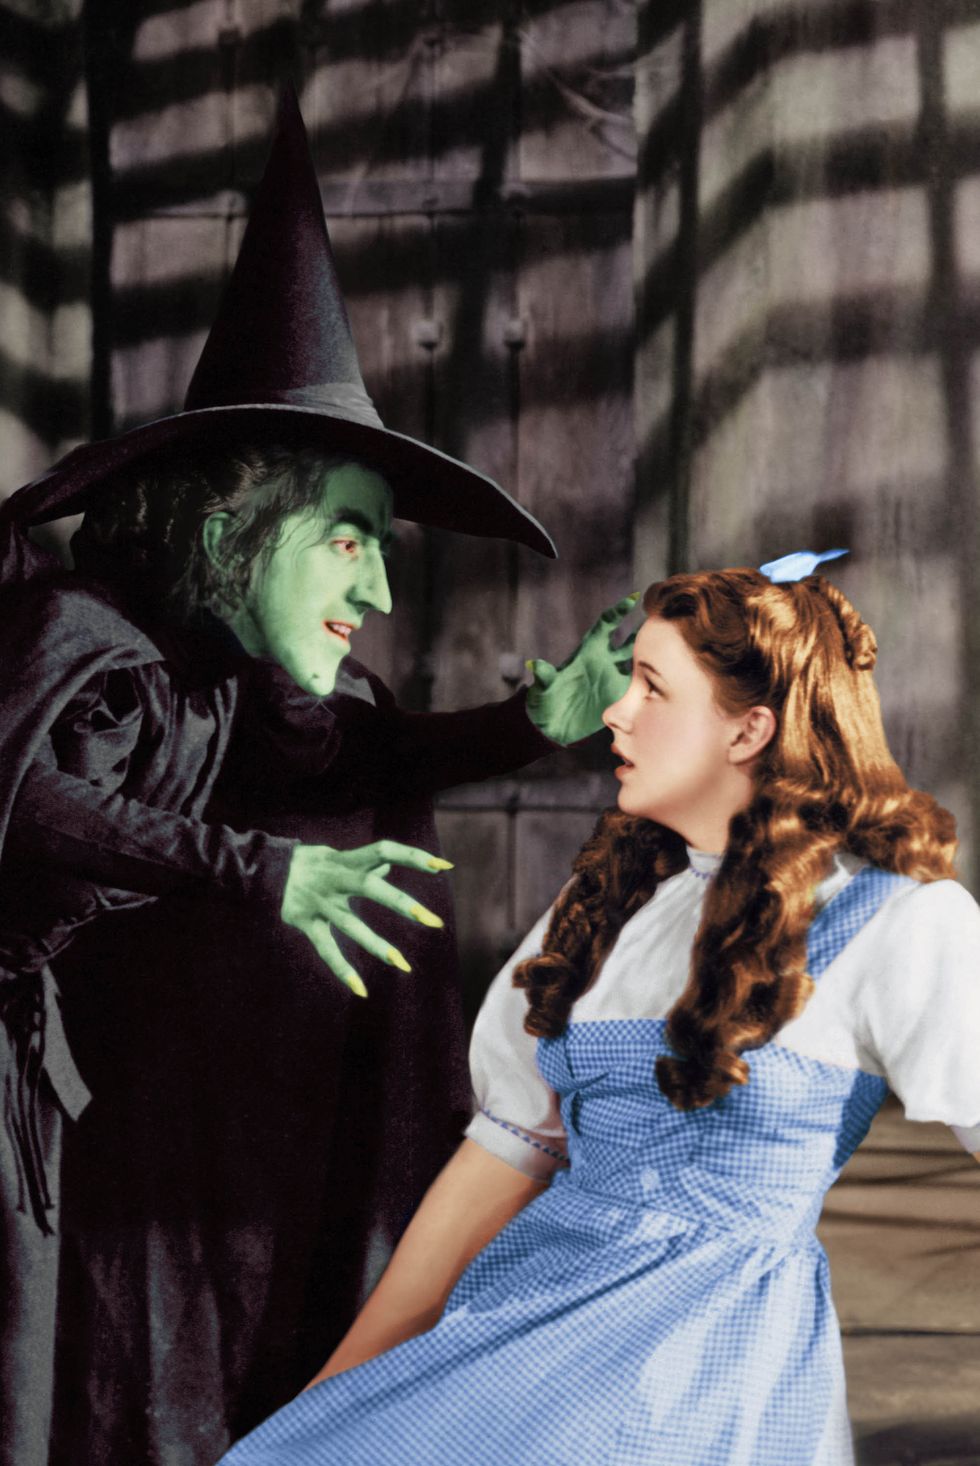 The Wizard of Oz at 80: fascinating facts about the 'cursed' film